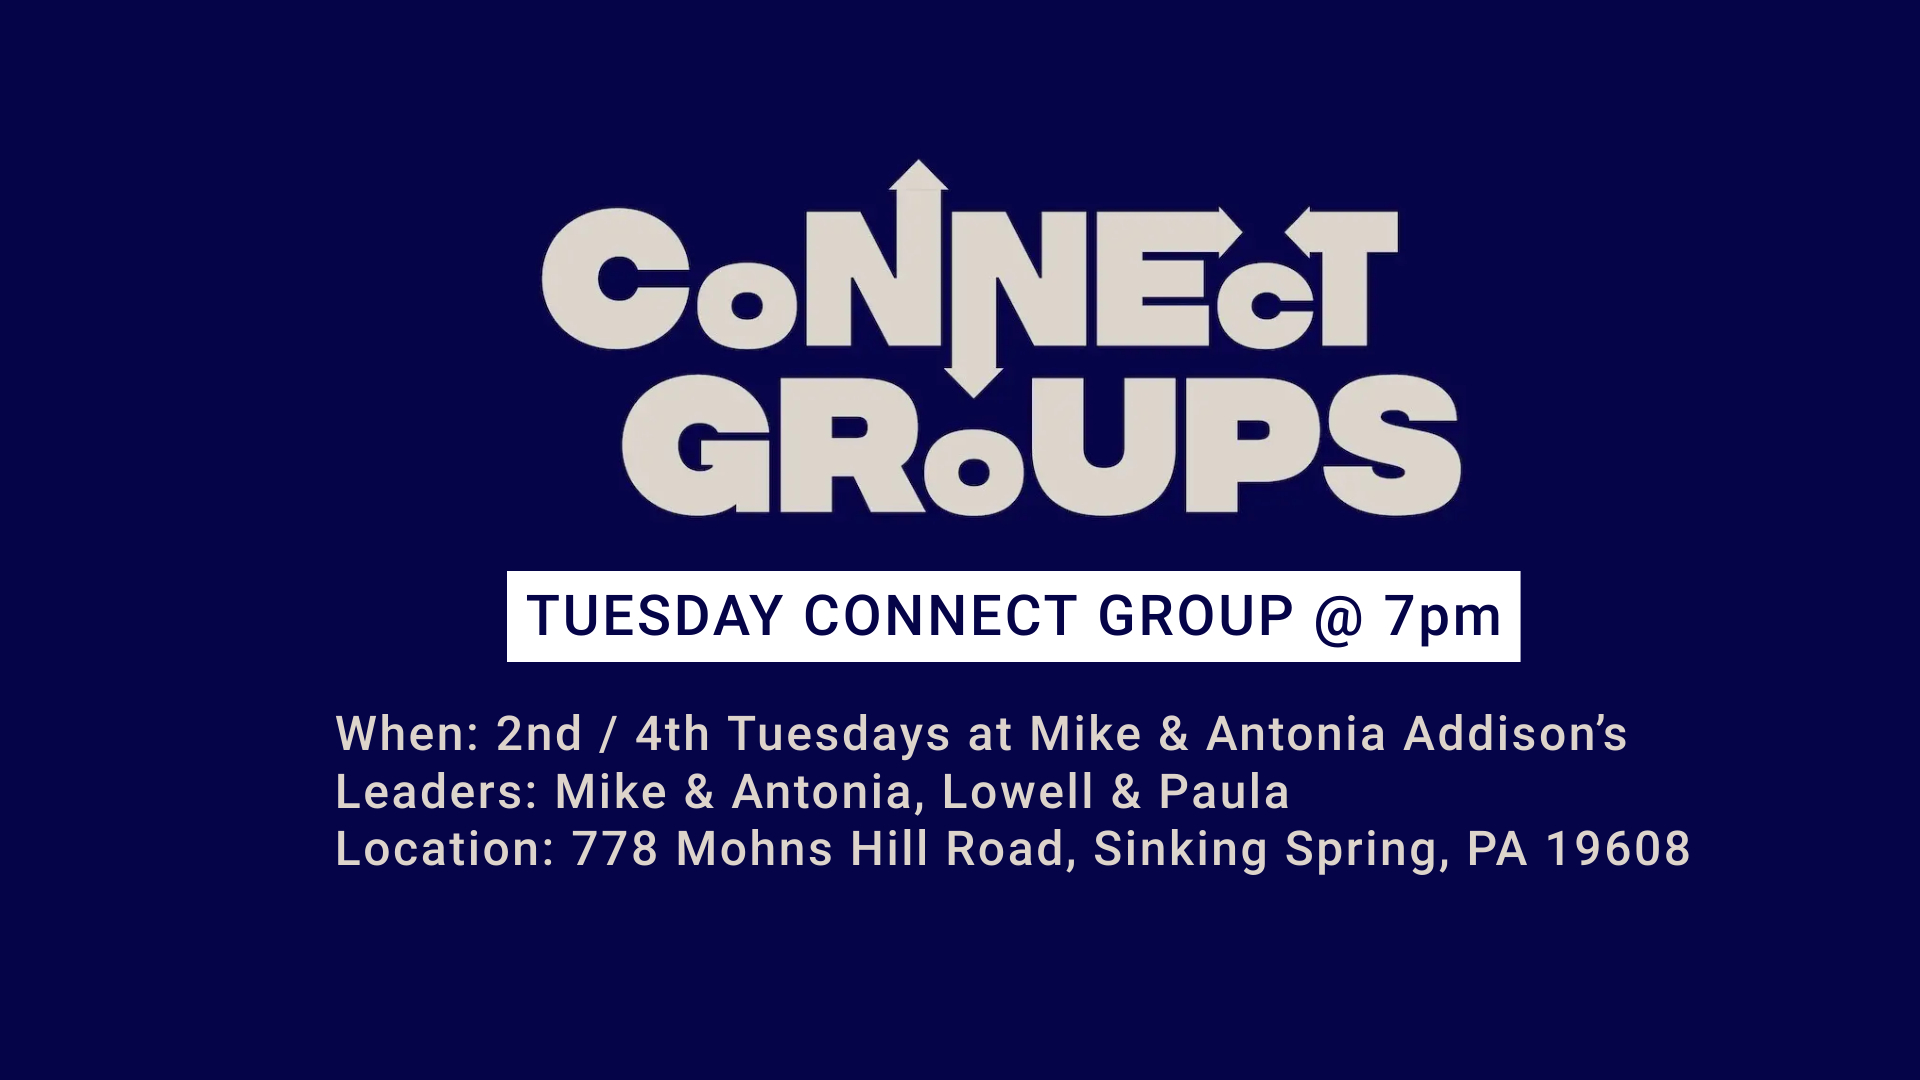 Tuesday Connect Group